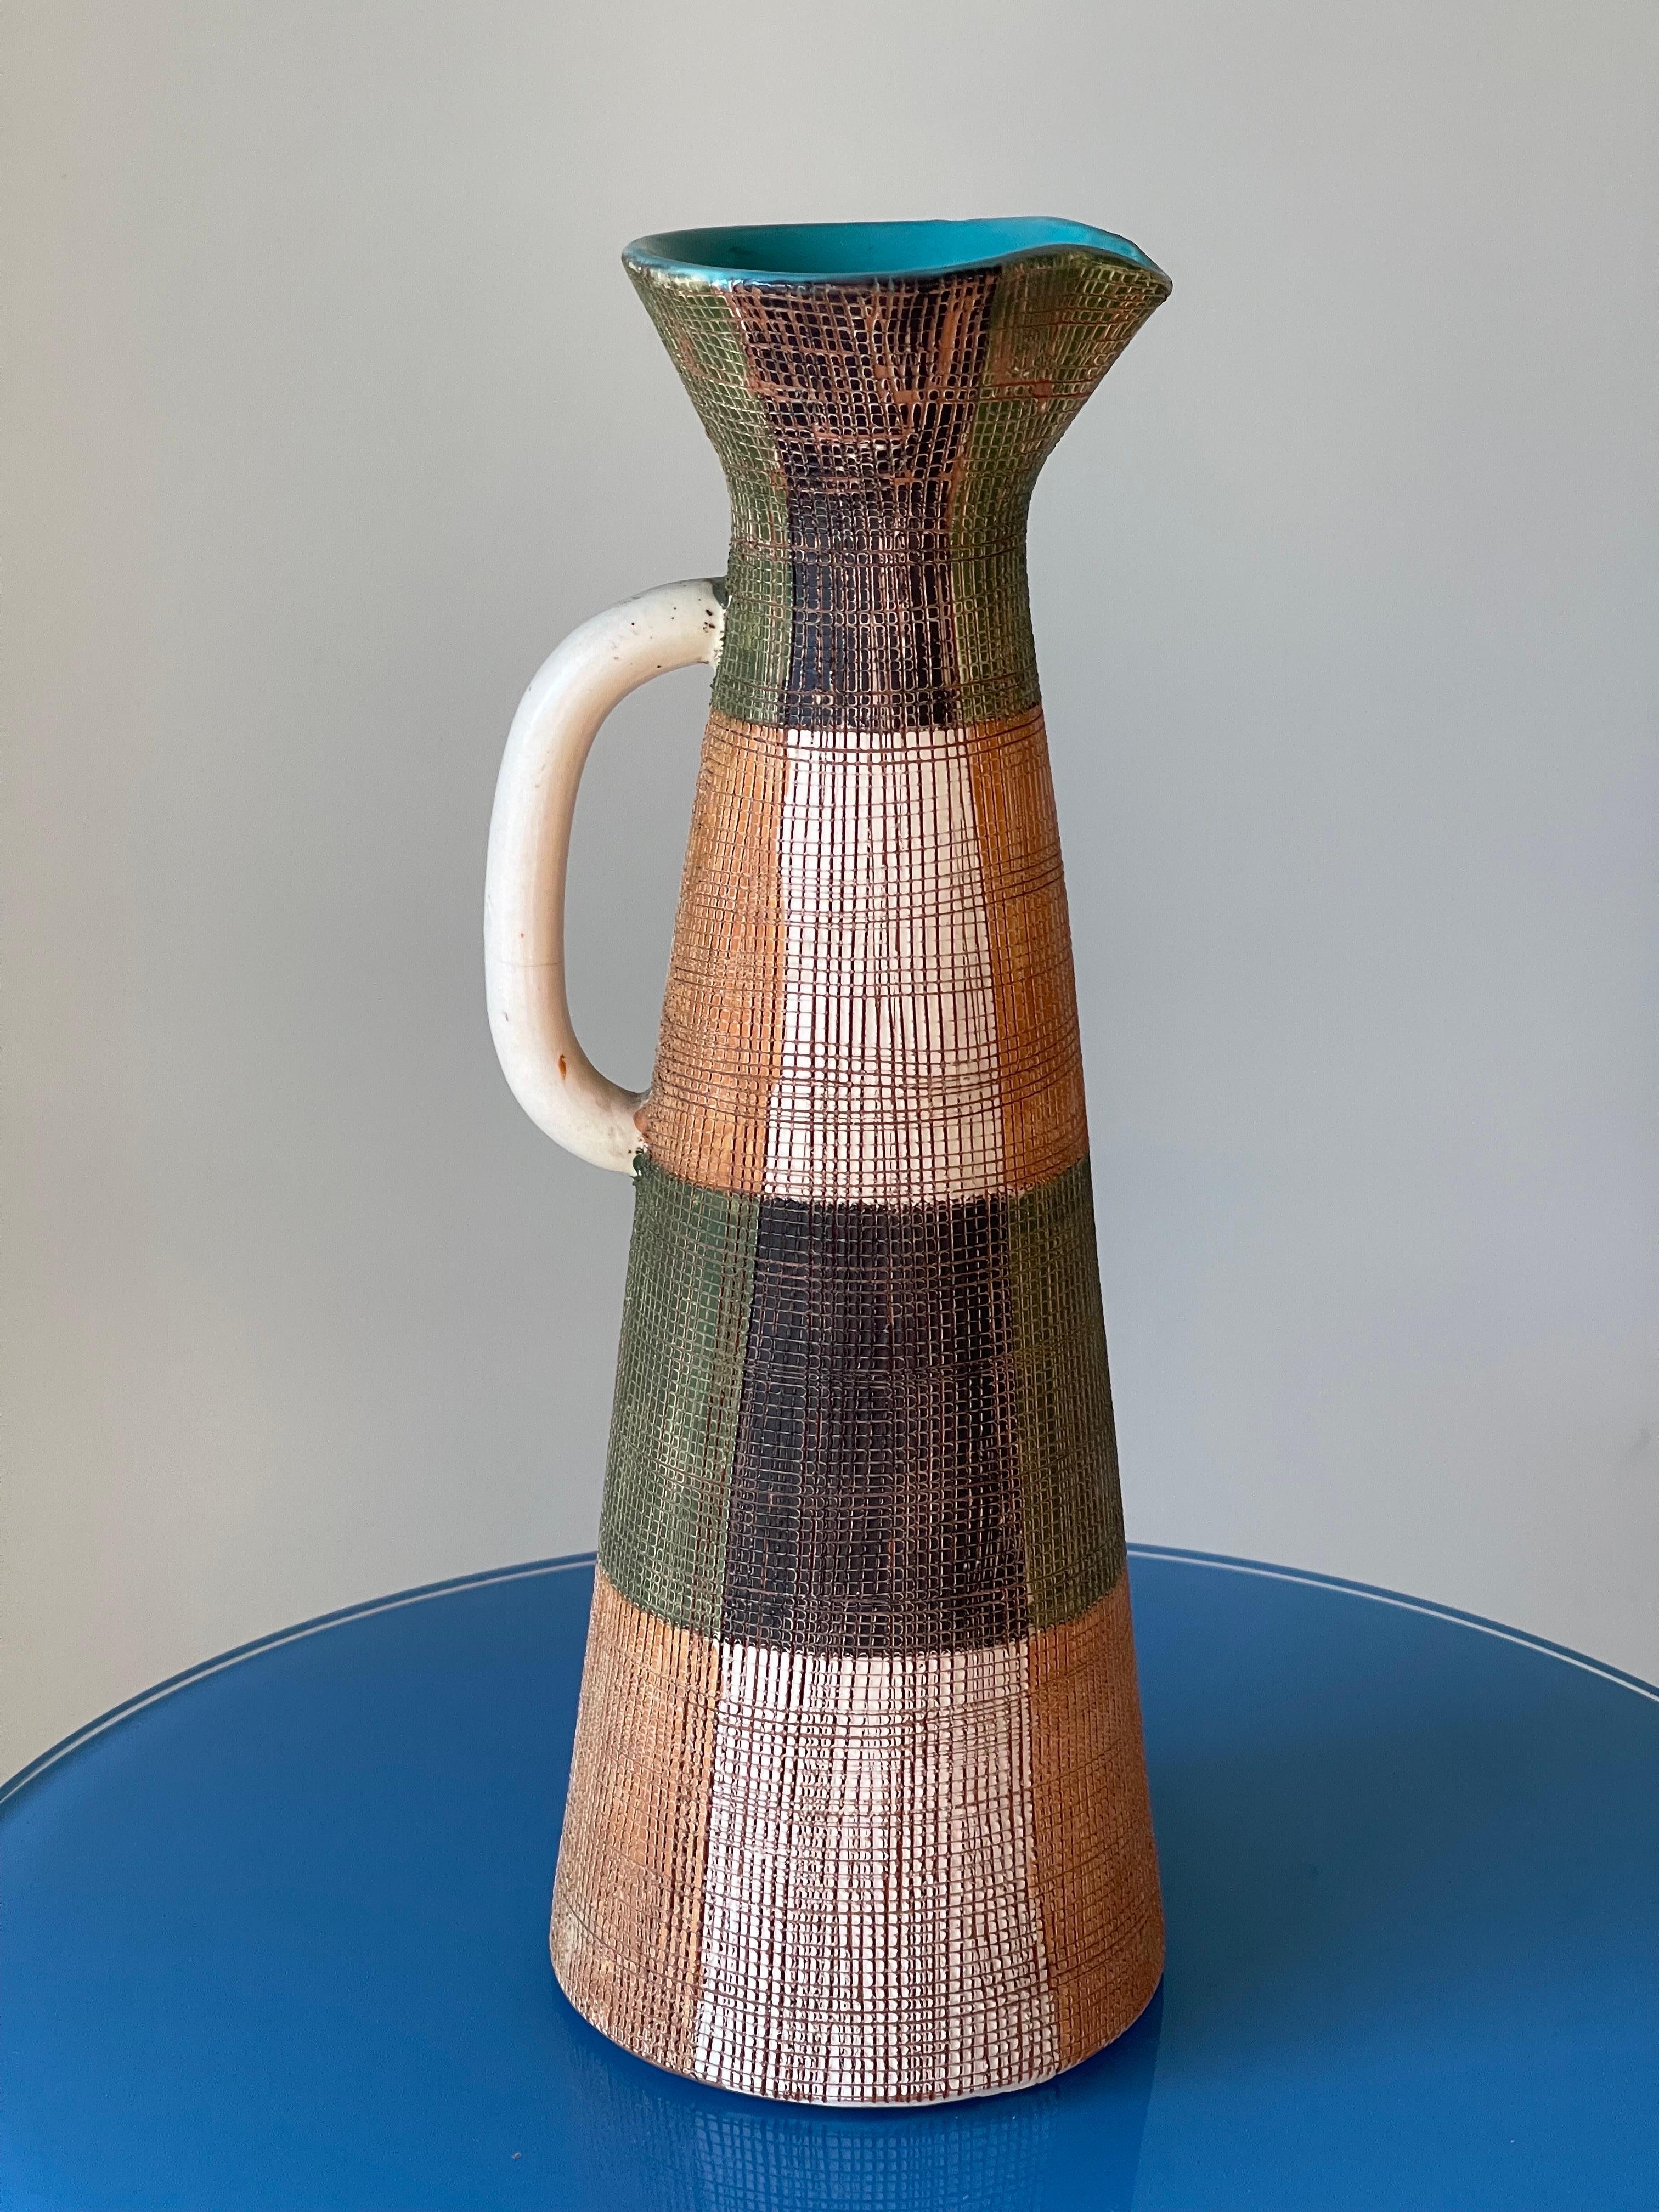 Eye catching Italian Ceramic Pitcher by Bitossi in “Seta” glaze for Raymor - 1960’s. Excellent condition with a little glaze loss spot on the top rim that was done when making this in the kiln. 13 x 4.5.